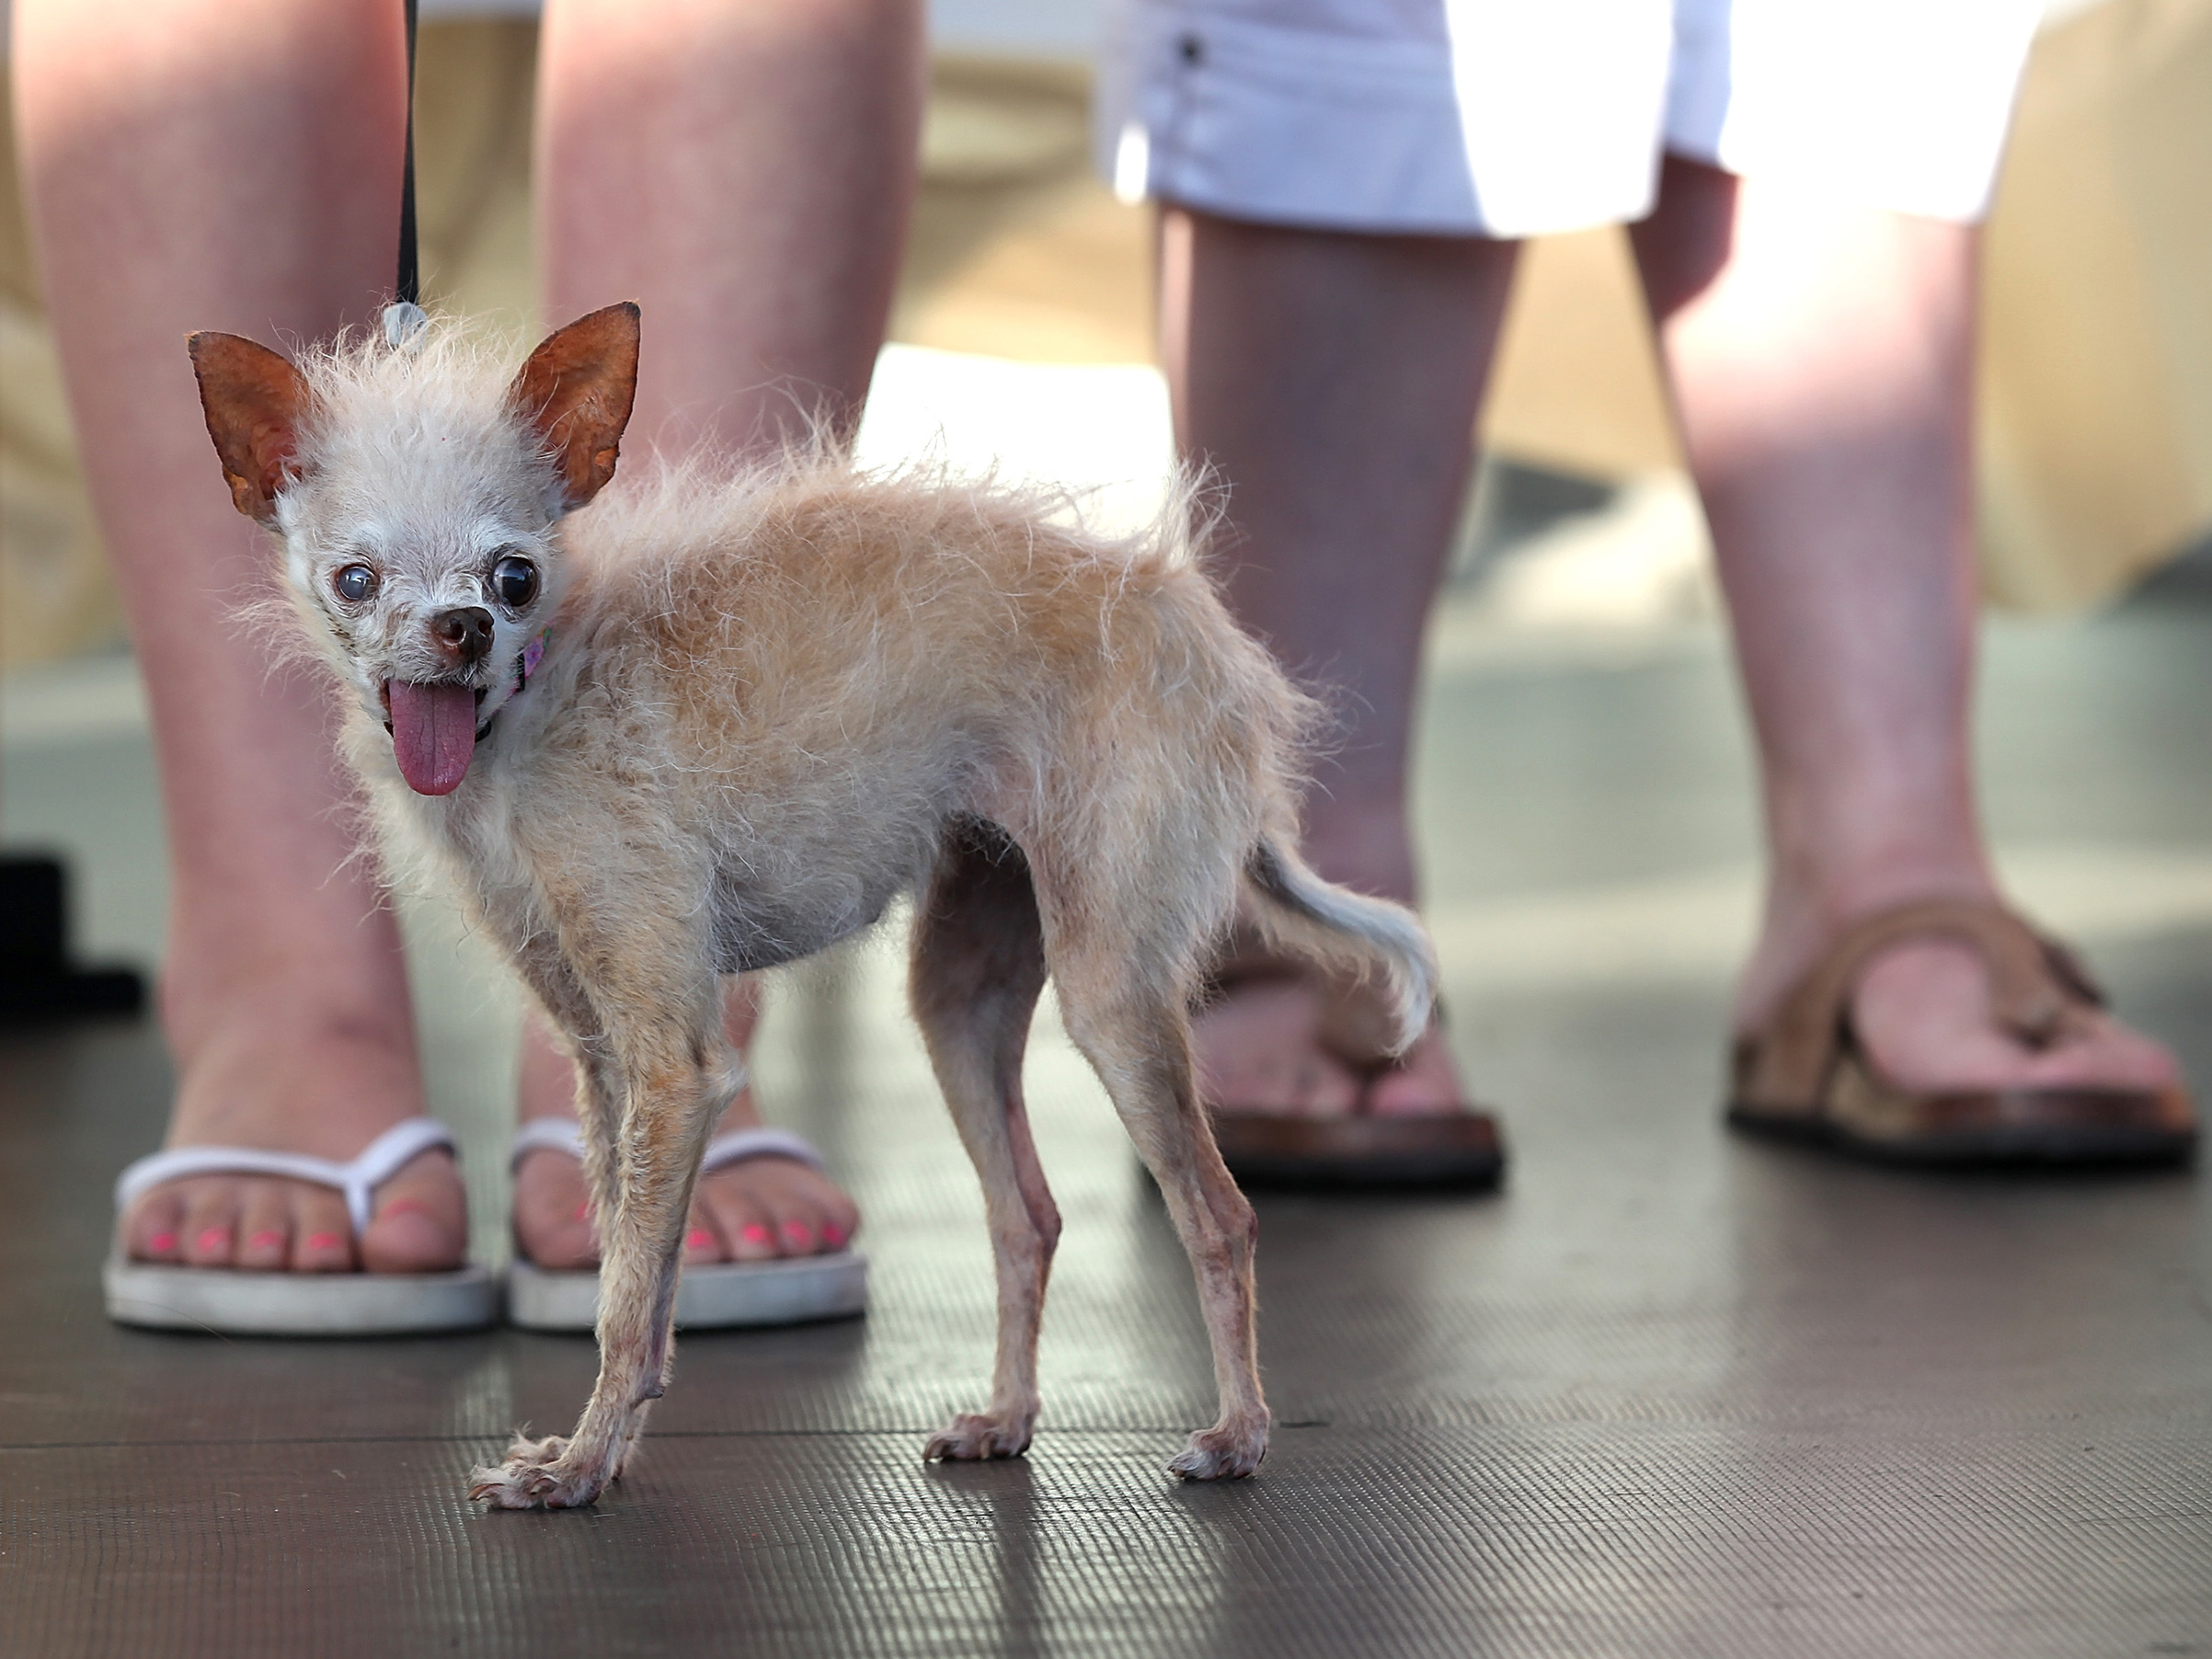 A dog named Yoda looks on during the 23rd Annual World's Ugliest Dog Contest at the Sonoma-Marin County Fair on June 24, 2011 in Petaluma, Calif.